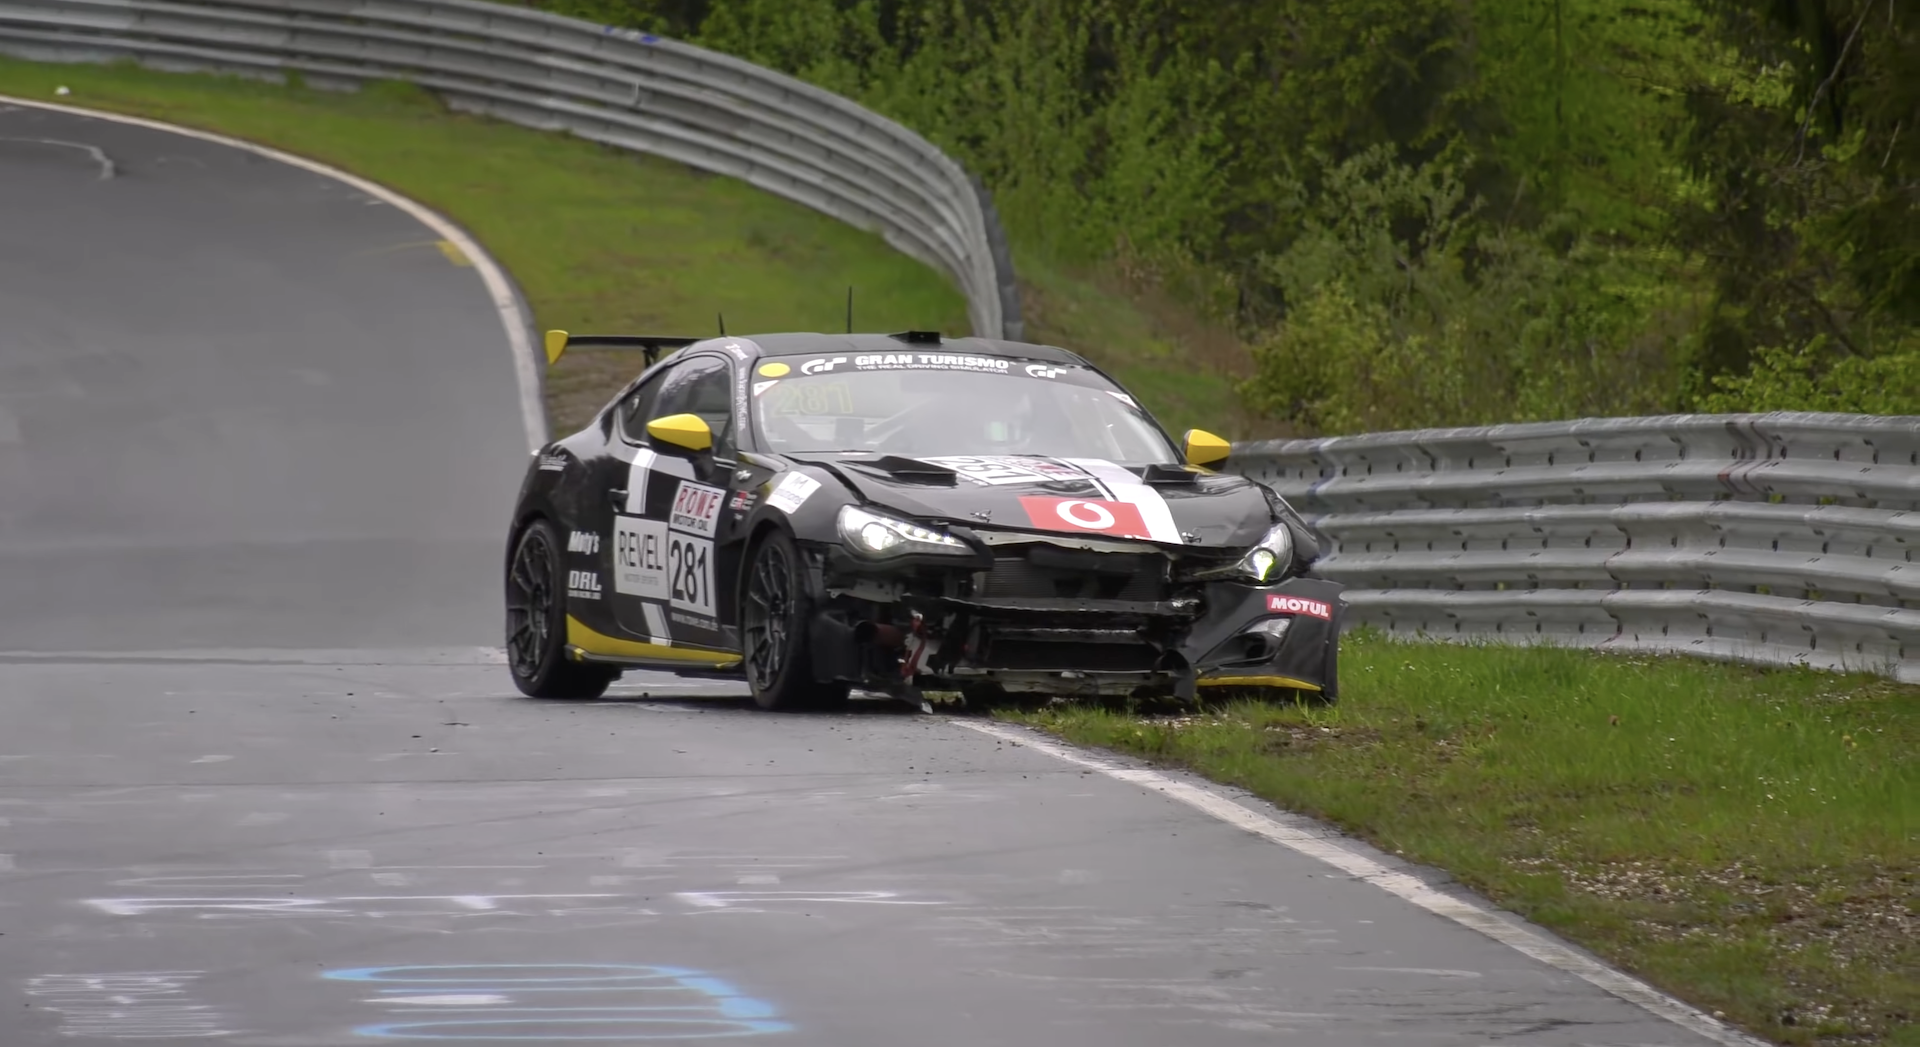 An image showing a crashed car on the Nürburgring track.